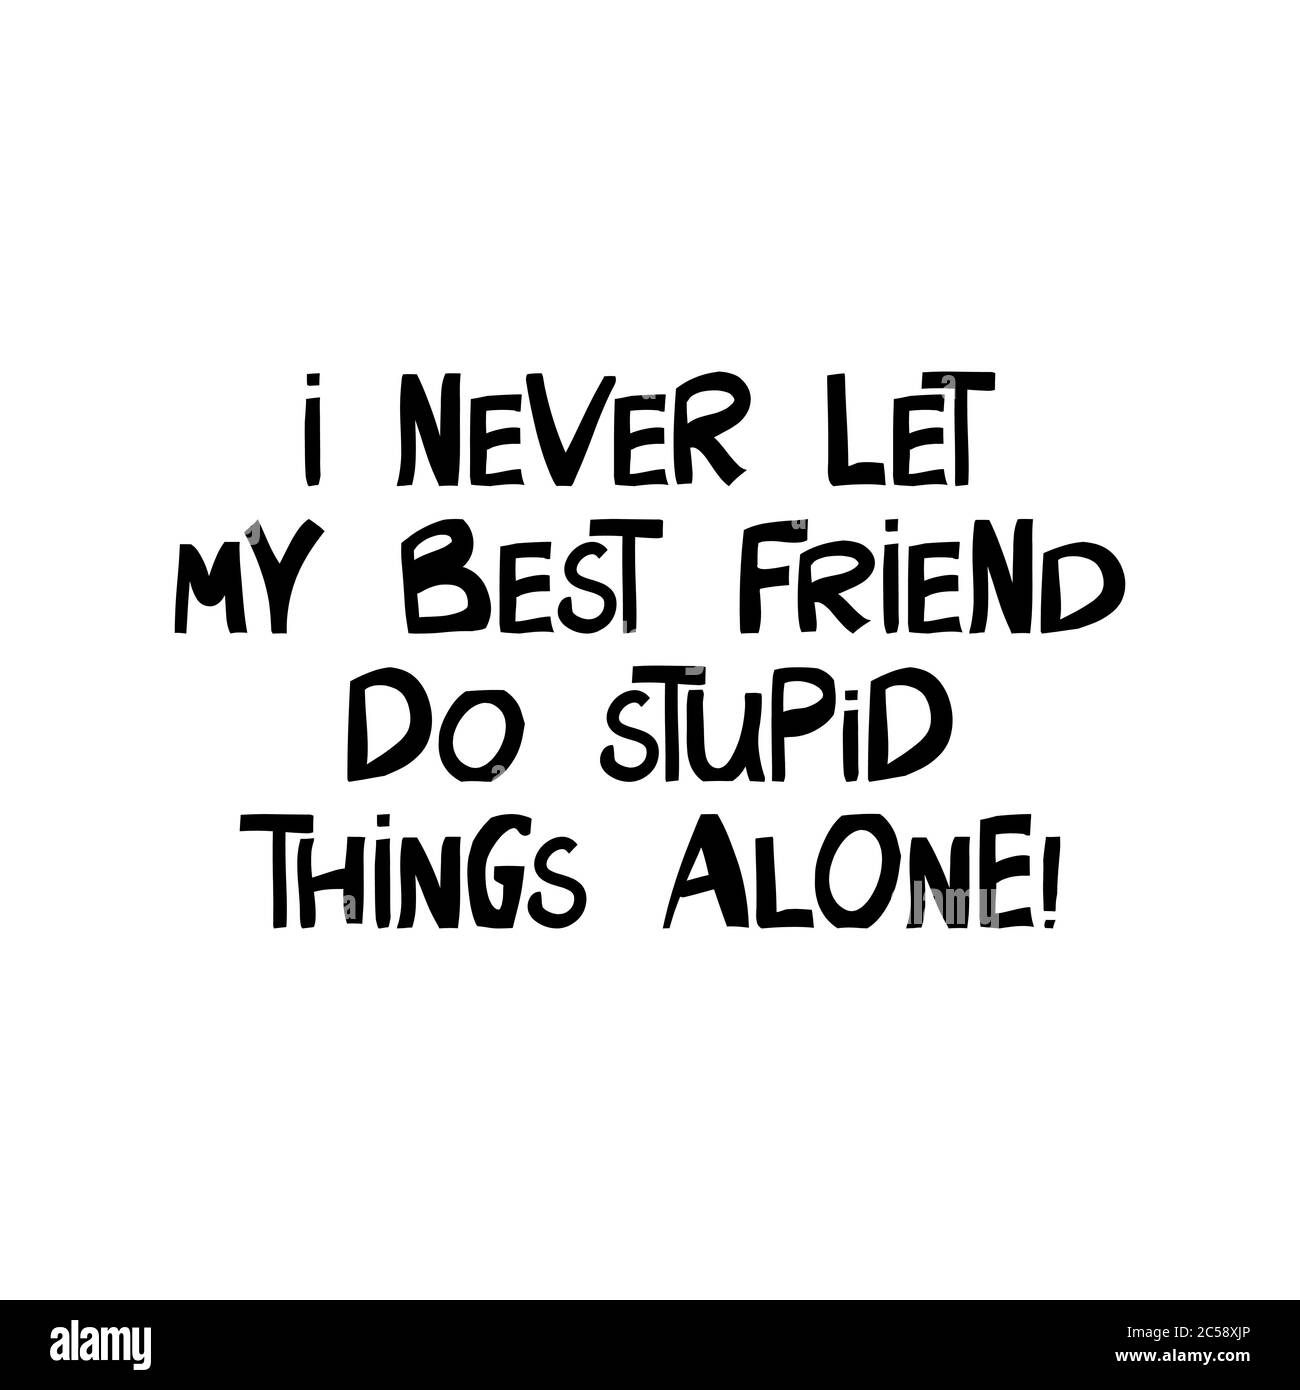 I never let my best friend do stupid things alone. Cute hand drawn lettering in modern scandinavian style. Isolated on white background. Vector stock Stock Vector